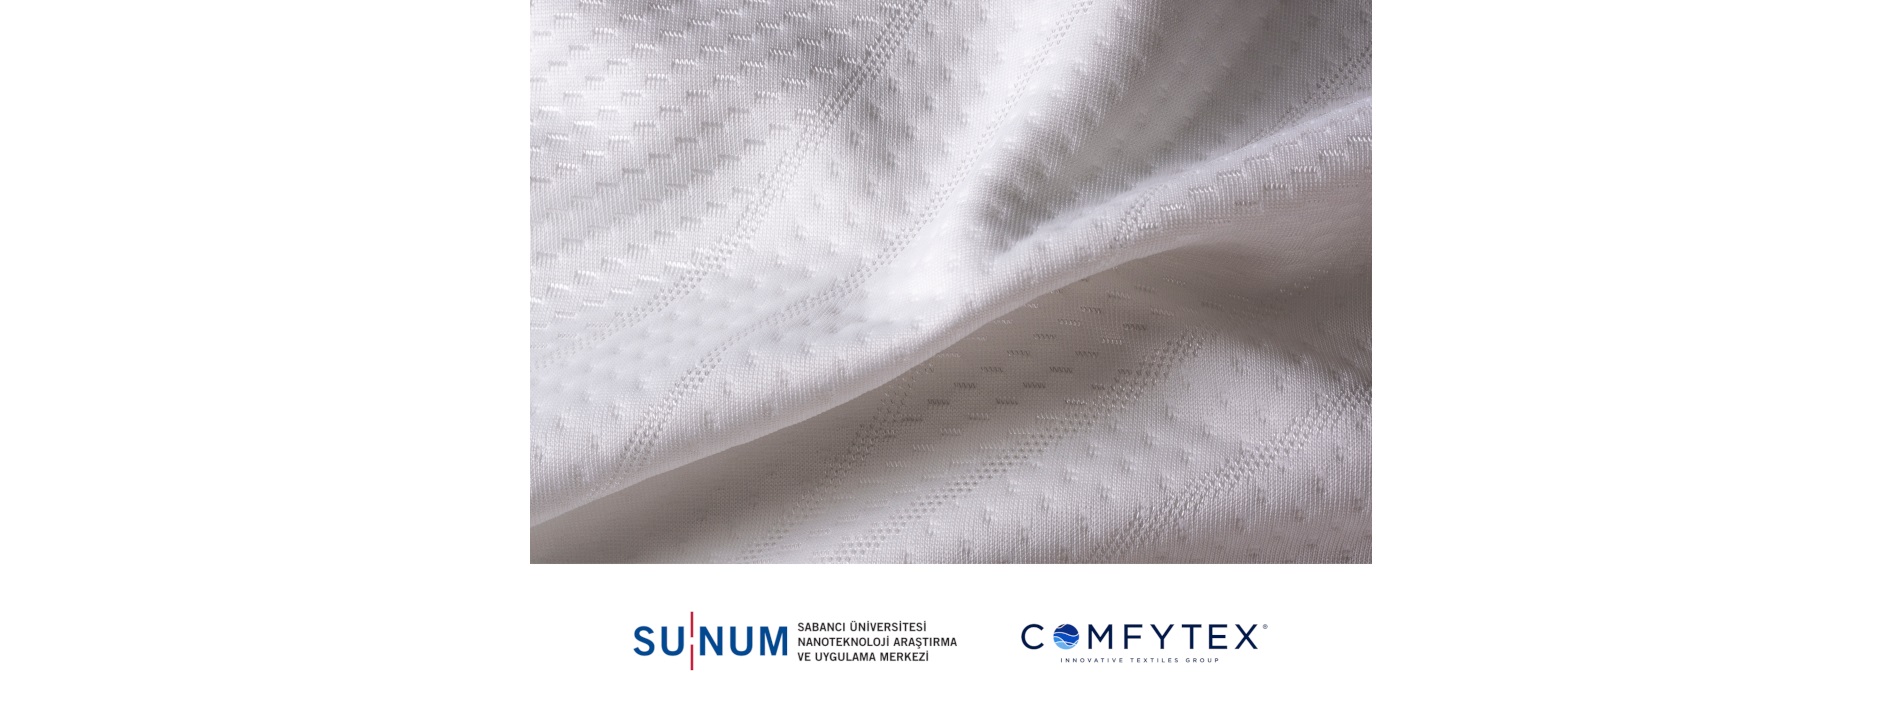 Borophene Textile Applications Collaboration from SUNUM and COMFYTEX